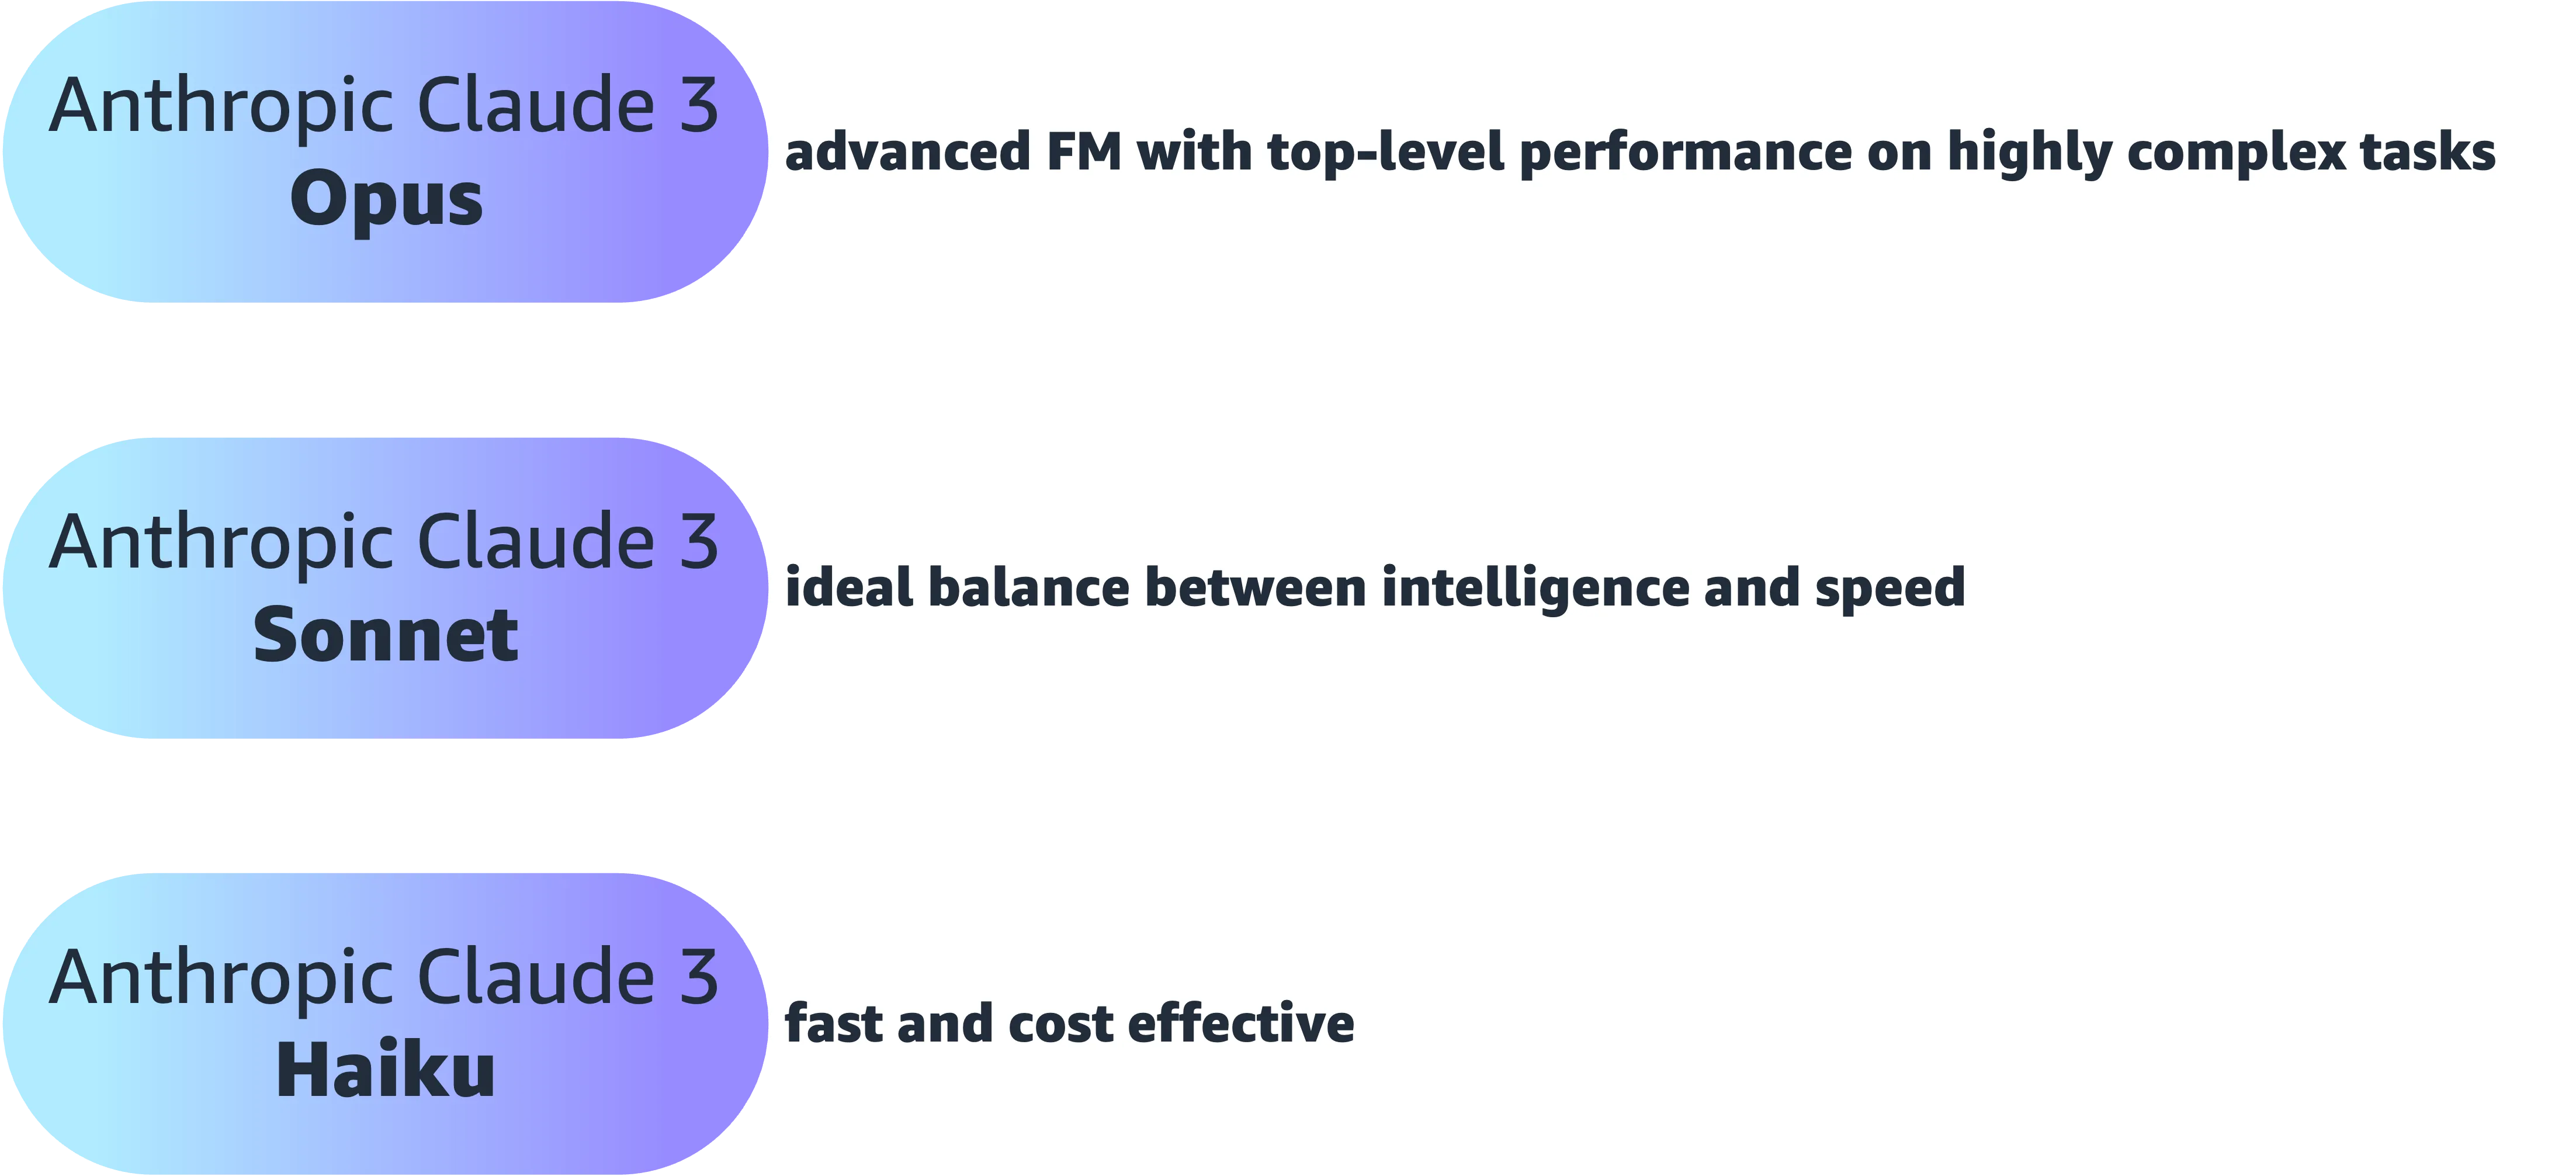 Ops - advanced FM with top-level performance on highly complex tasks, Sonnet is an ideal balance between intelligence and speed and Haiku is fast and cost effective